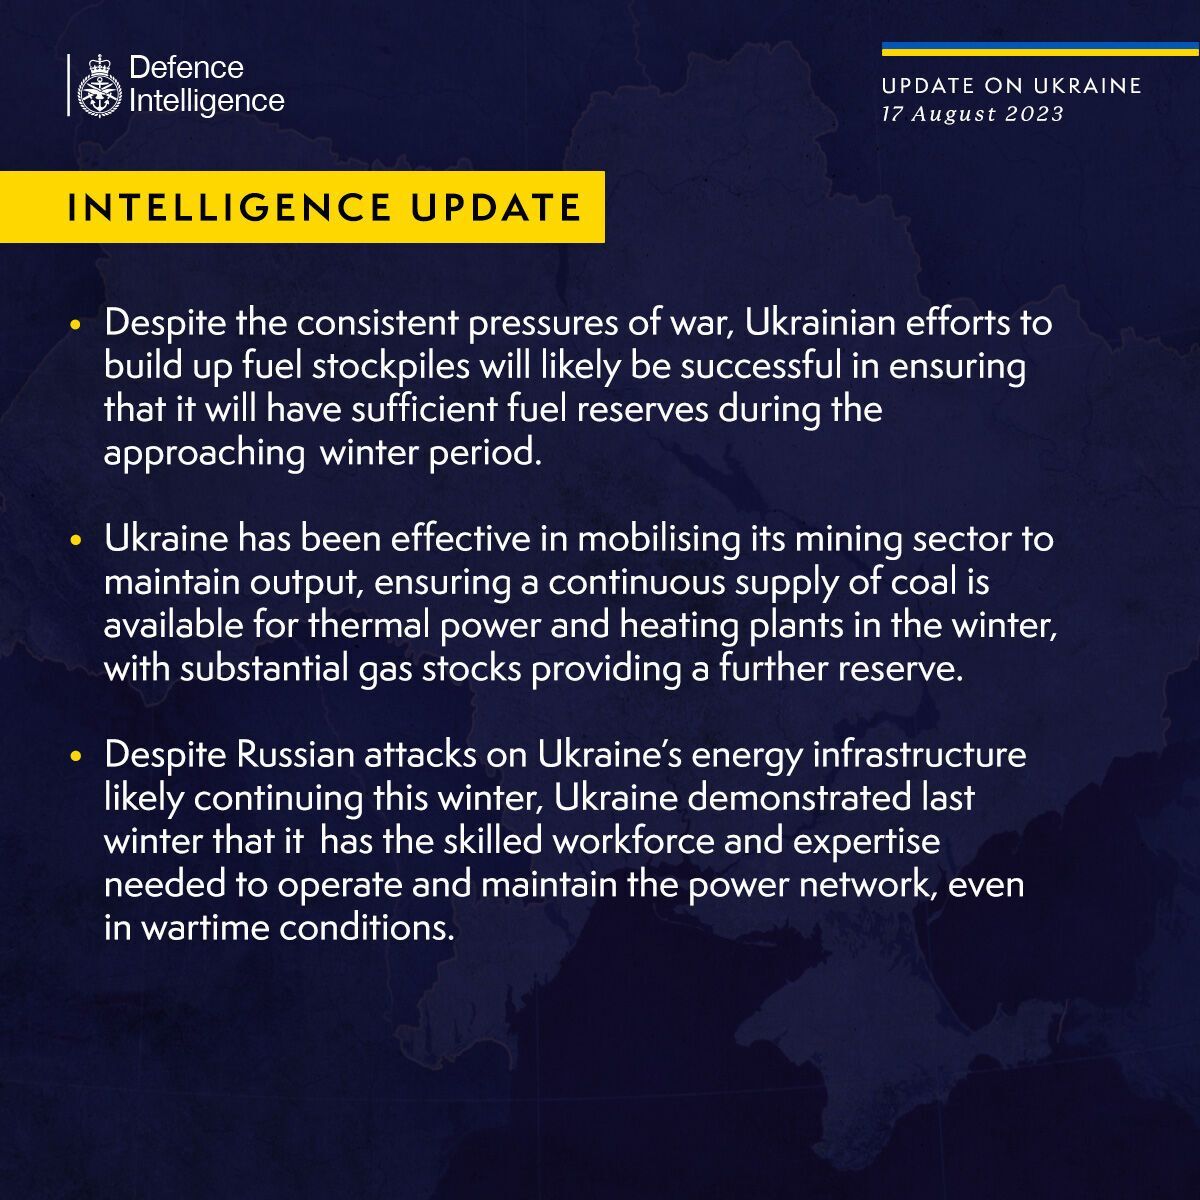 Russia may continue attacks on Ukraine's energy sector: Britain's intelligence agency voices prediction